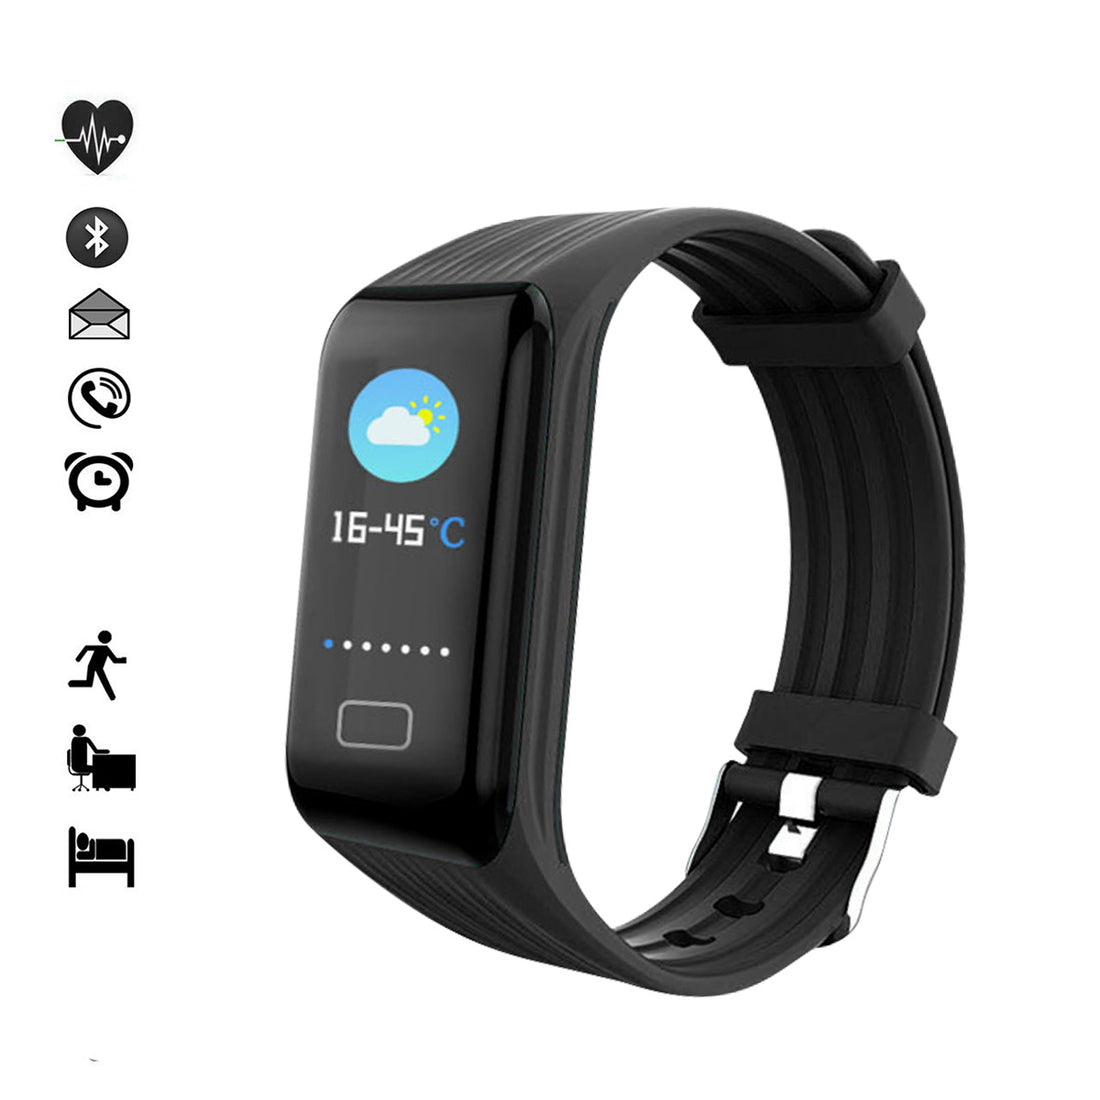 MONTRE SPORT GPS BLUETOOTH MULTI-FONCTIONS COMPATIBLE iOS&ANDROID